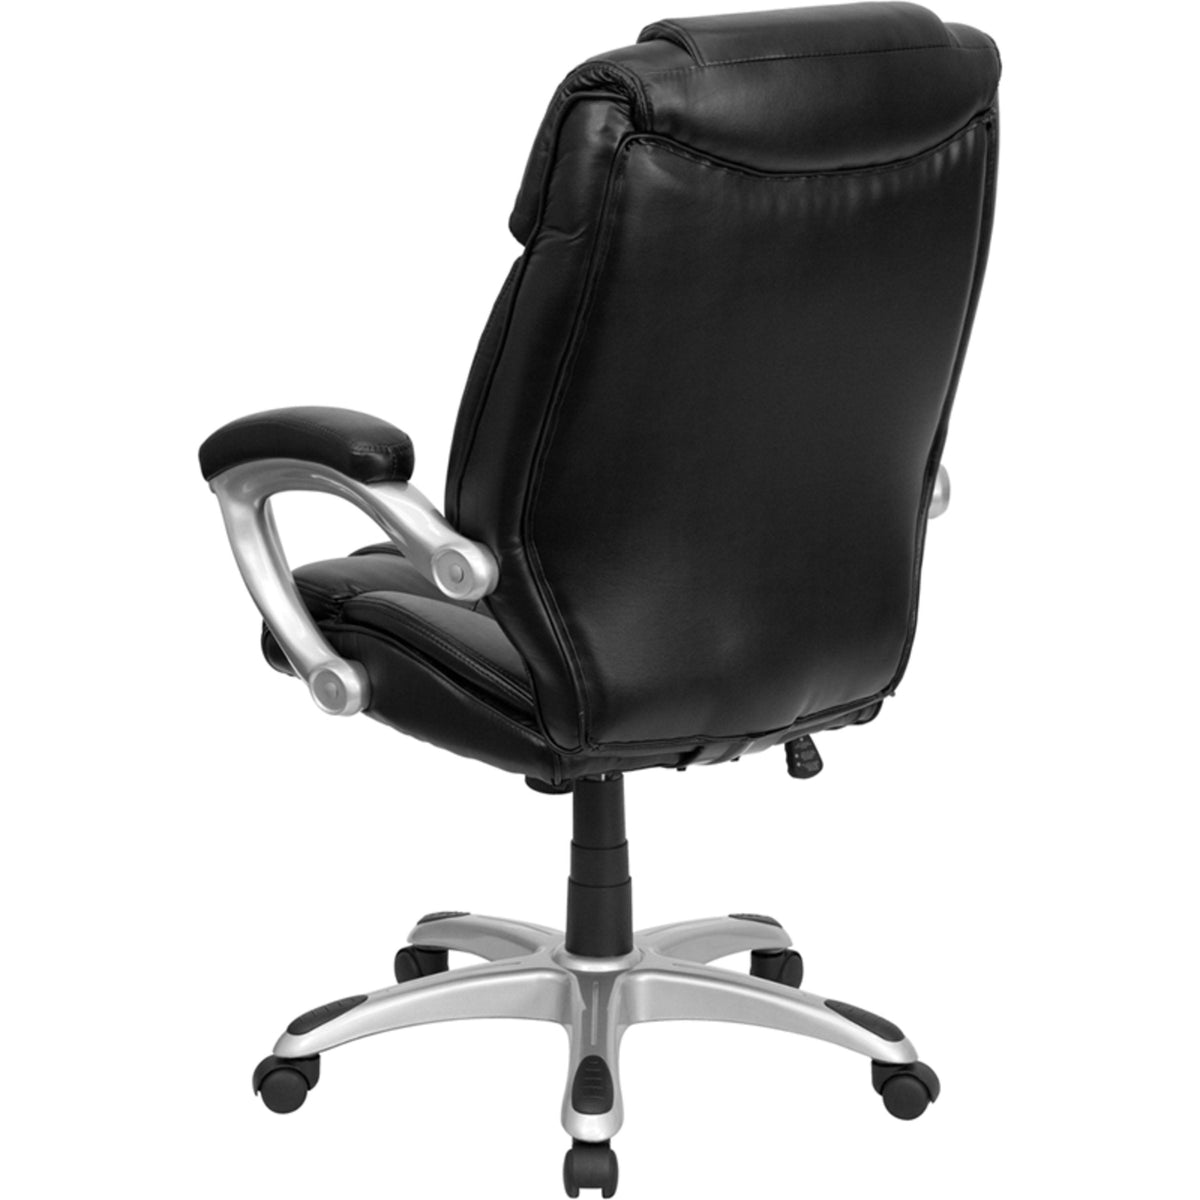 High Back Black LeatherSoft Layered Upholstered Office Chair w/Silver Nylon Base